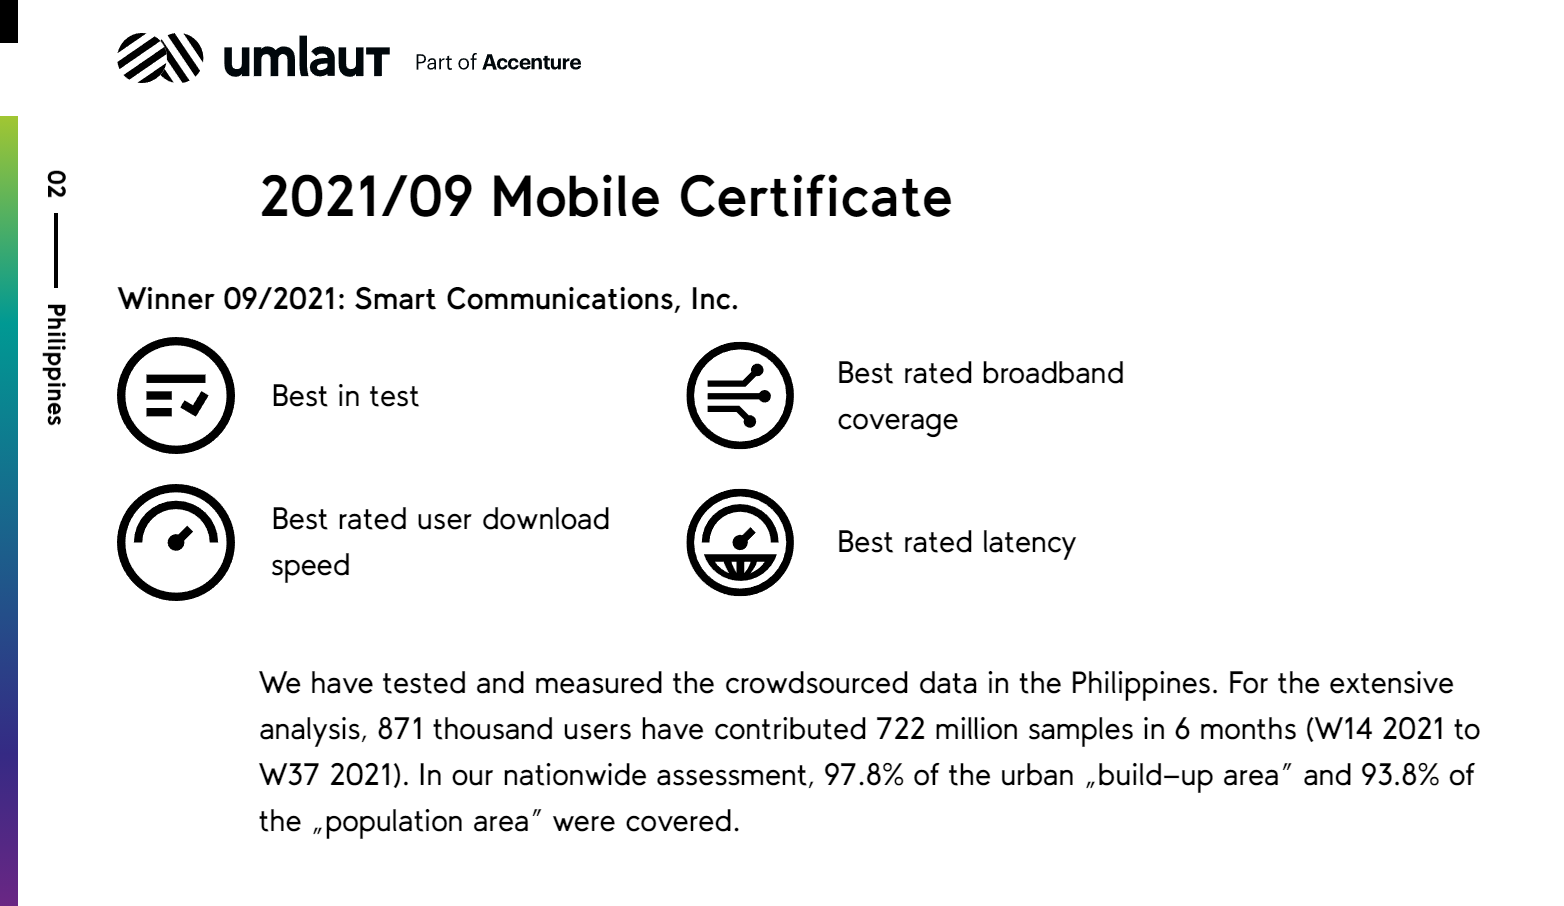 Smart delivers the Philippines' best-rated broadband, says global benchmarking firm umlaut